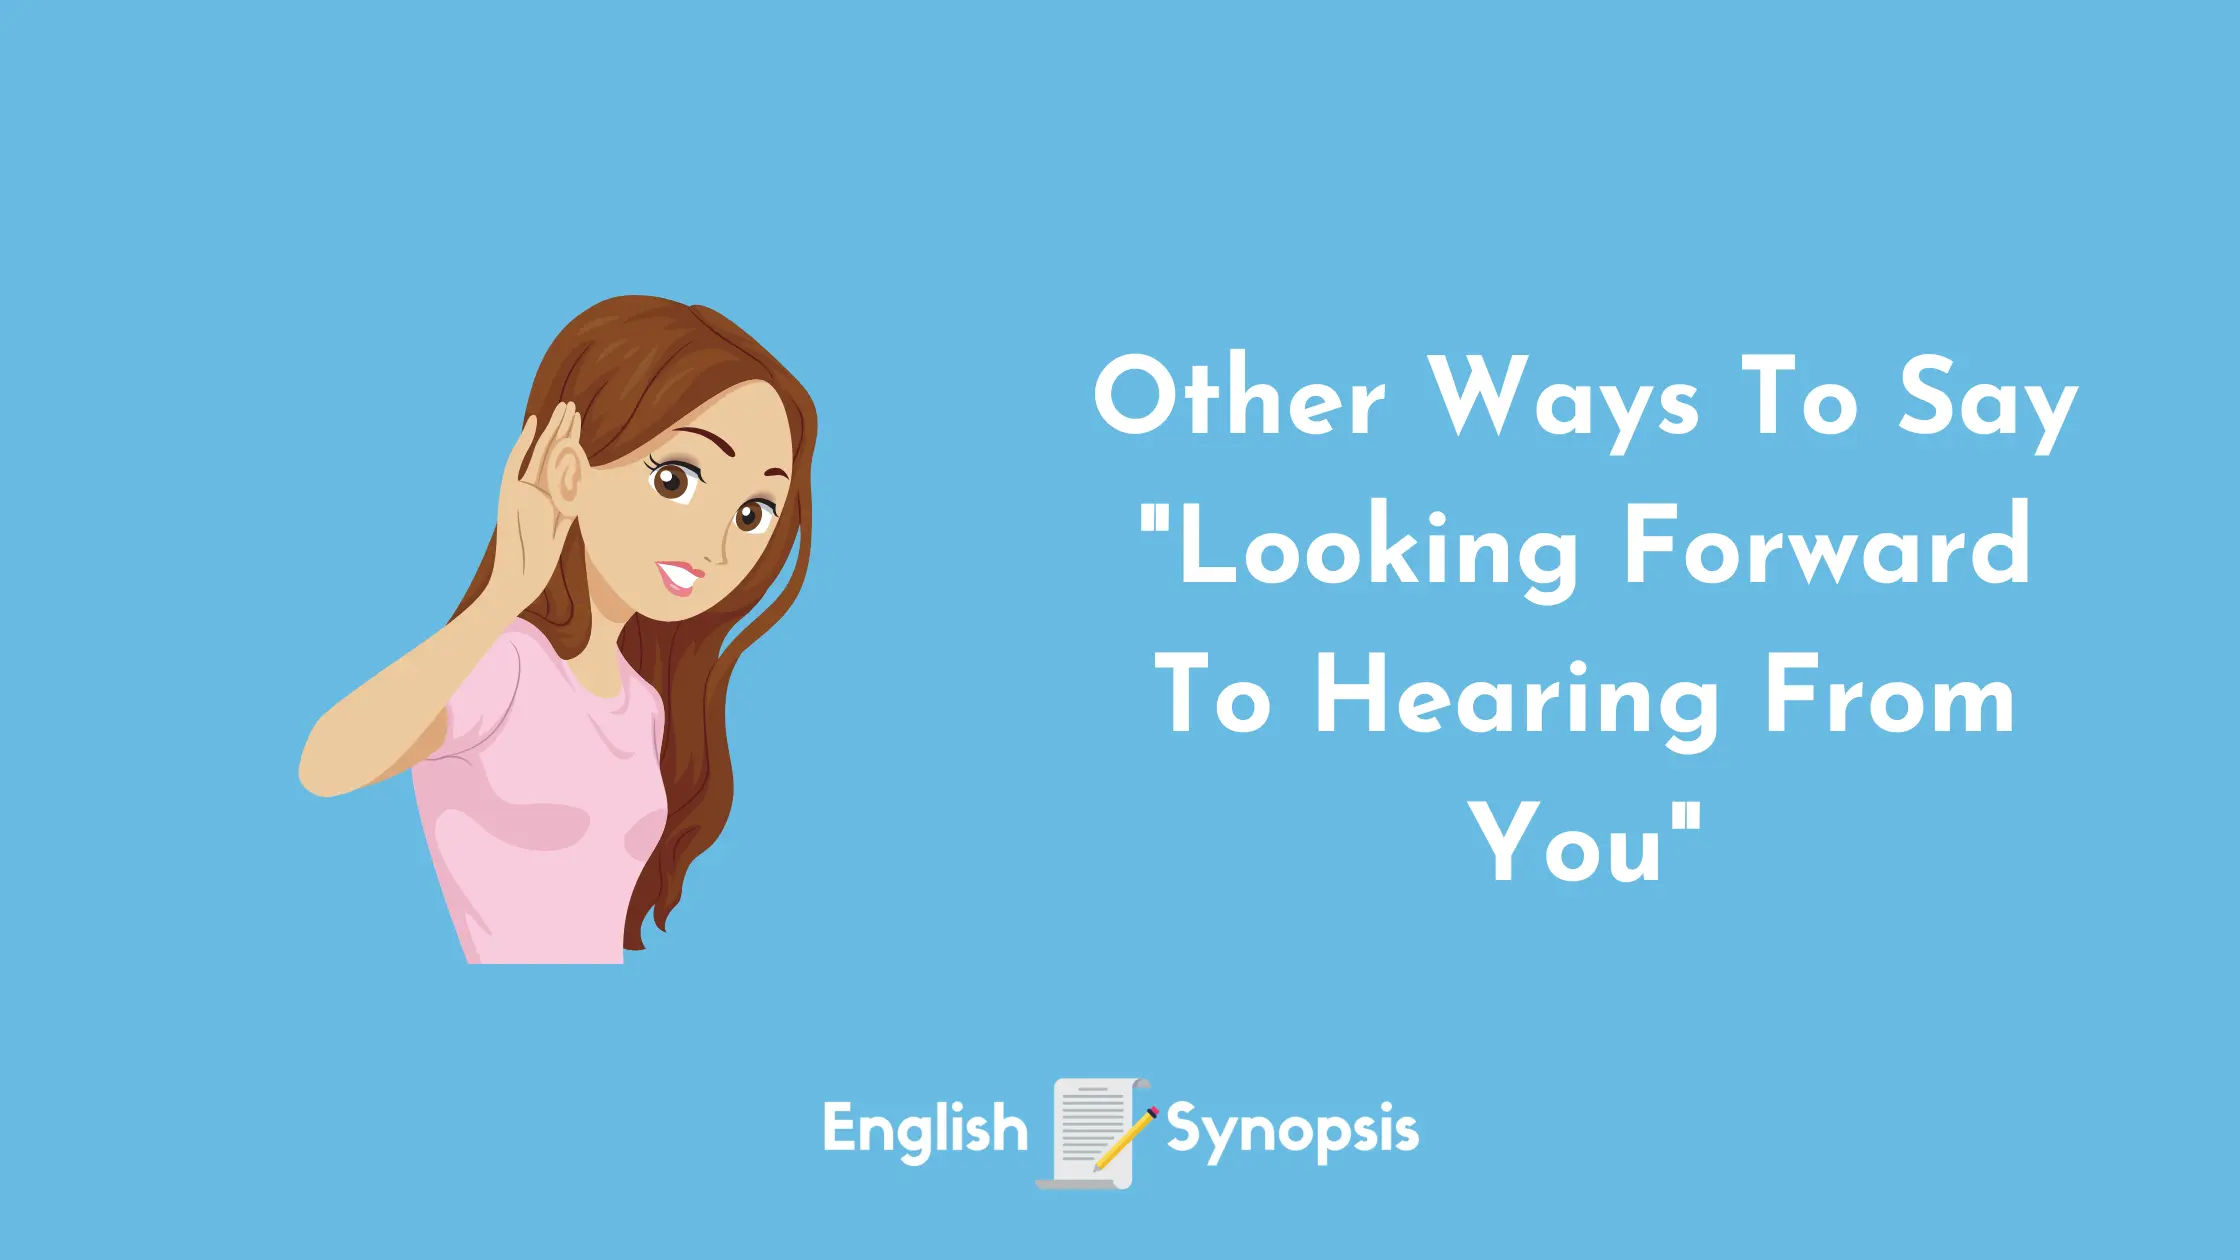 Other Ways To Say "Looking Forward To Hearing From You"